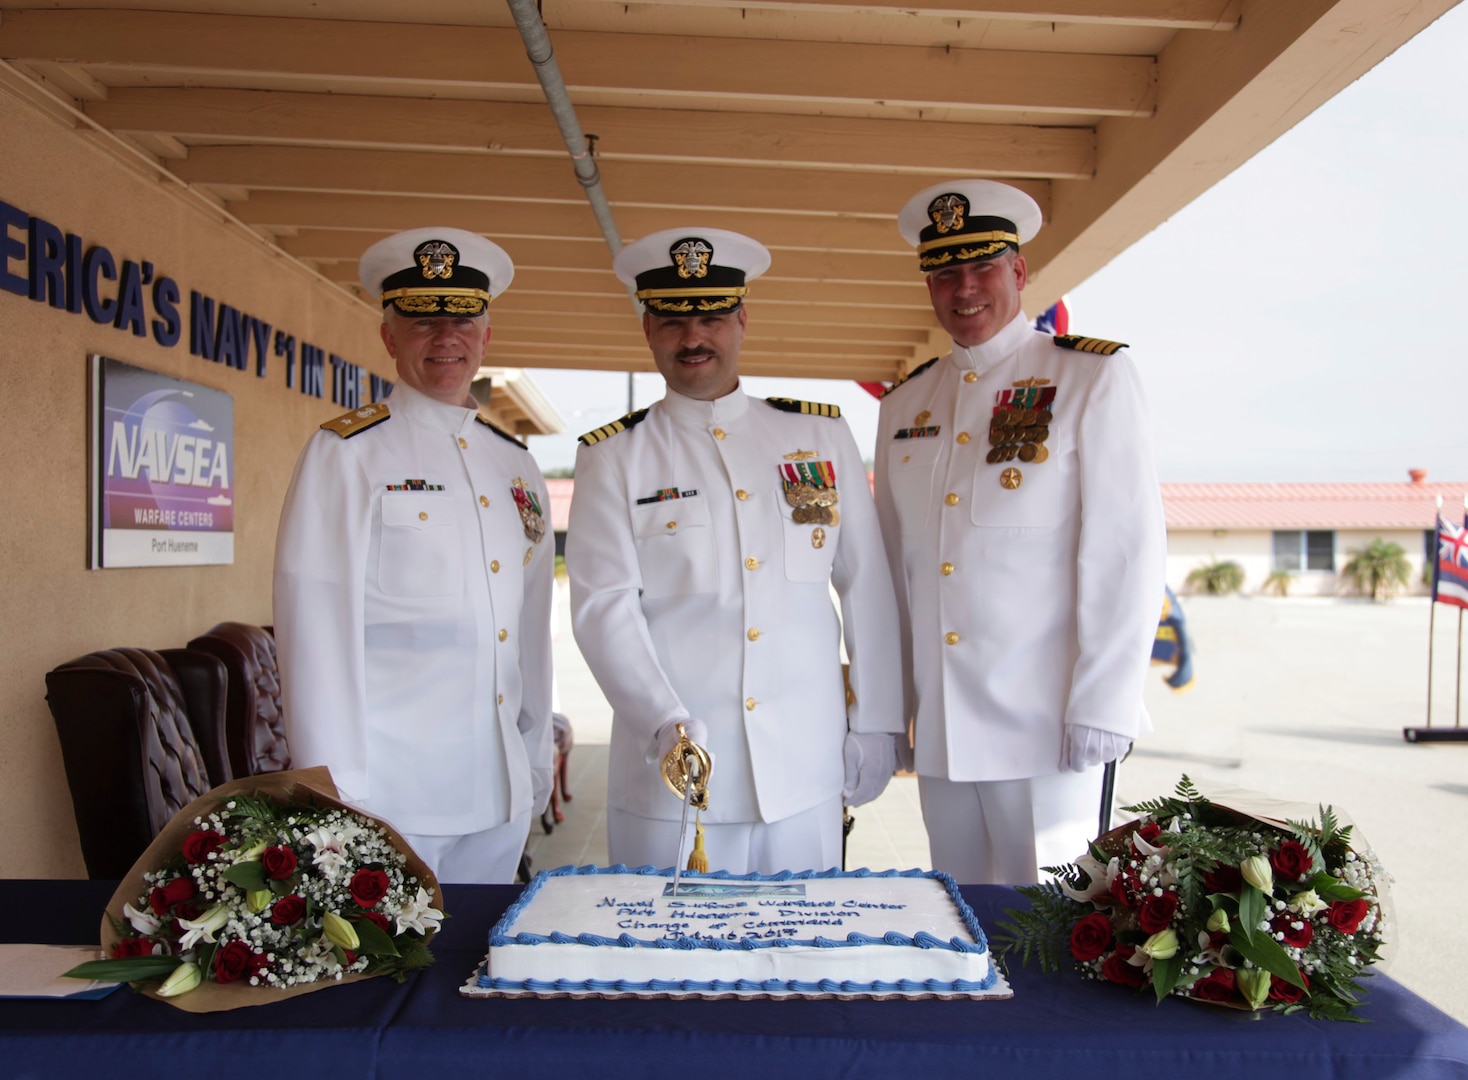 PORT HUENEME, Calif.—Naval Surface Warfare Center, Port Hueneme Division (NSWC PHD), held a change of command ceremony, July 10, where Capt. Stephen H. Murray relinquished command to Capt. Rafael “Ray” A. Acevedo. Pictured at the “ceremonial cake-cutting” with the naval officer’s sword are (from left to right): Rear Adm. John W. Ailes, deputy commander, Fleet Readiness Directorate, Space and Naval Warfare Systems Command, Capt. Rafael “Ray” A. Acevedo, current commanding officer, NSWC PHD, and Capt. Stephen H. Murray, former commanding officer, NSWC PHD and commanding officer NSWC Corona.